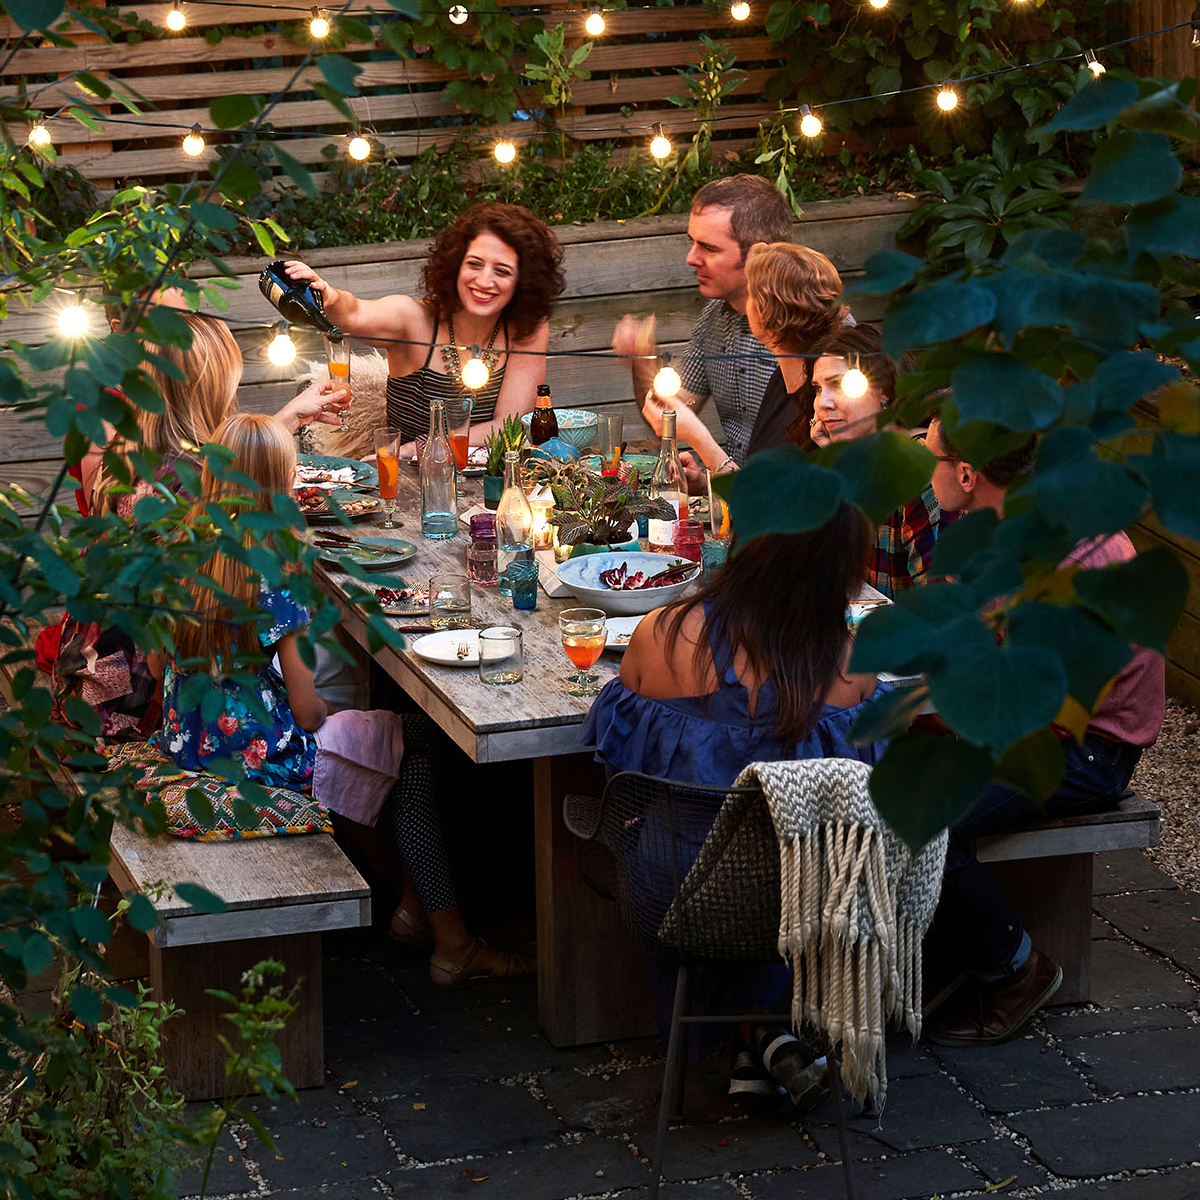 A group of people in their 40s eatingat an outdoor table with string lights and green plants